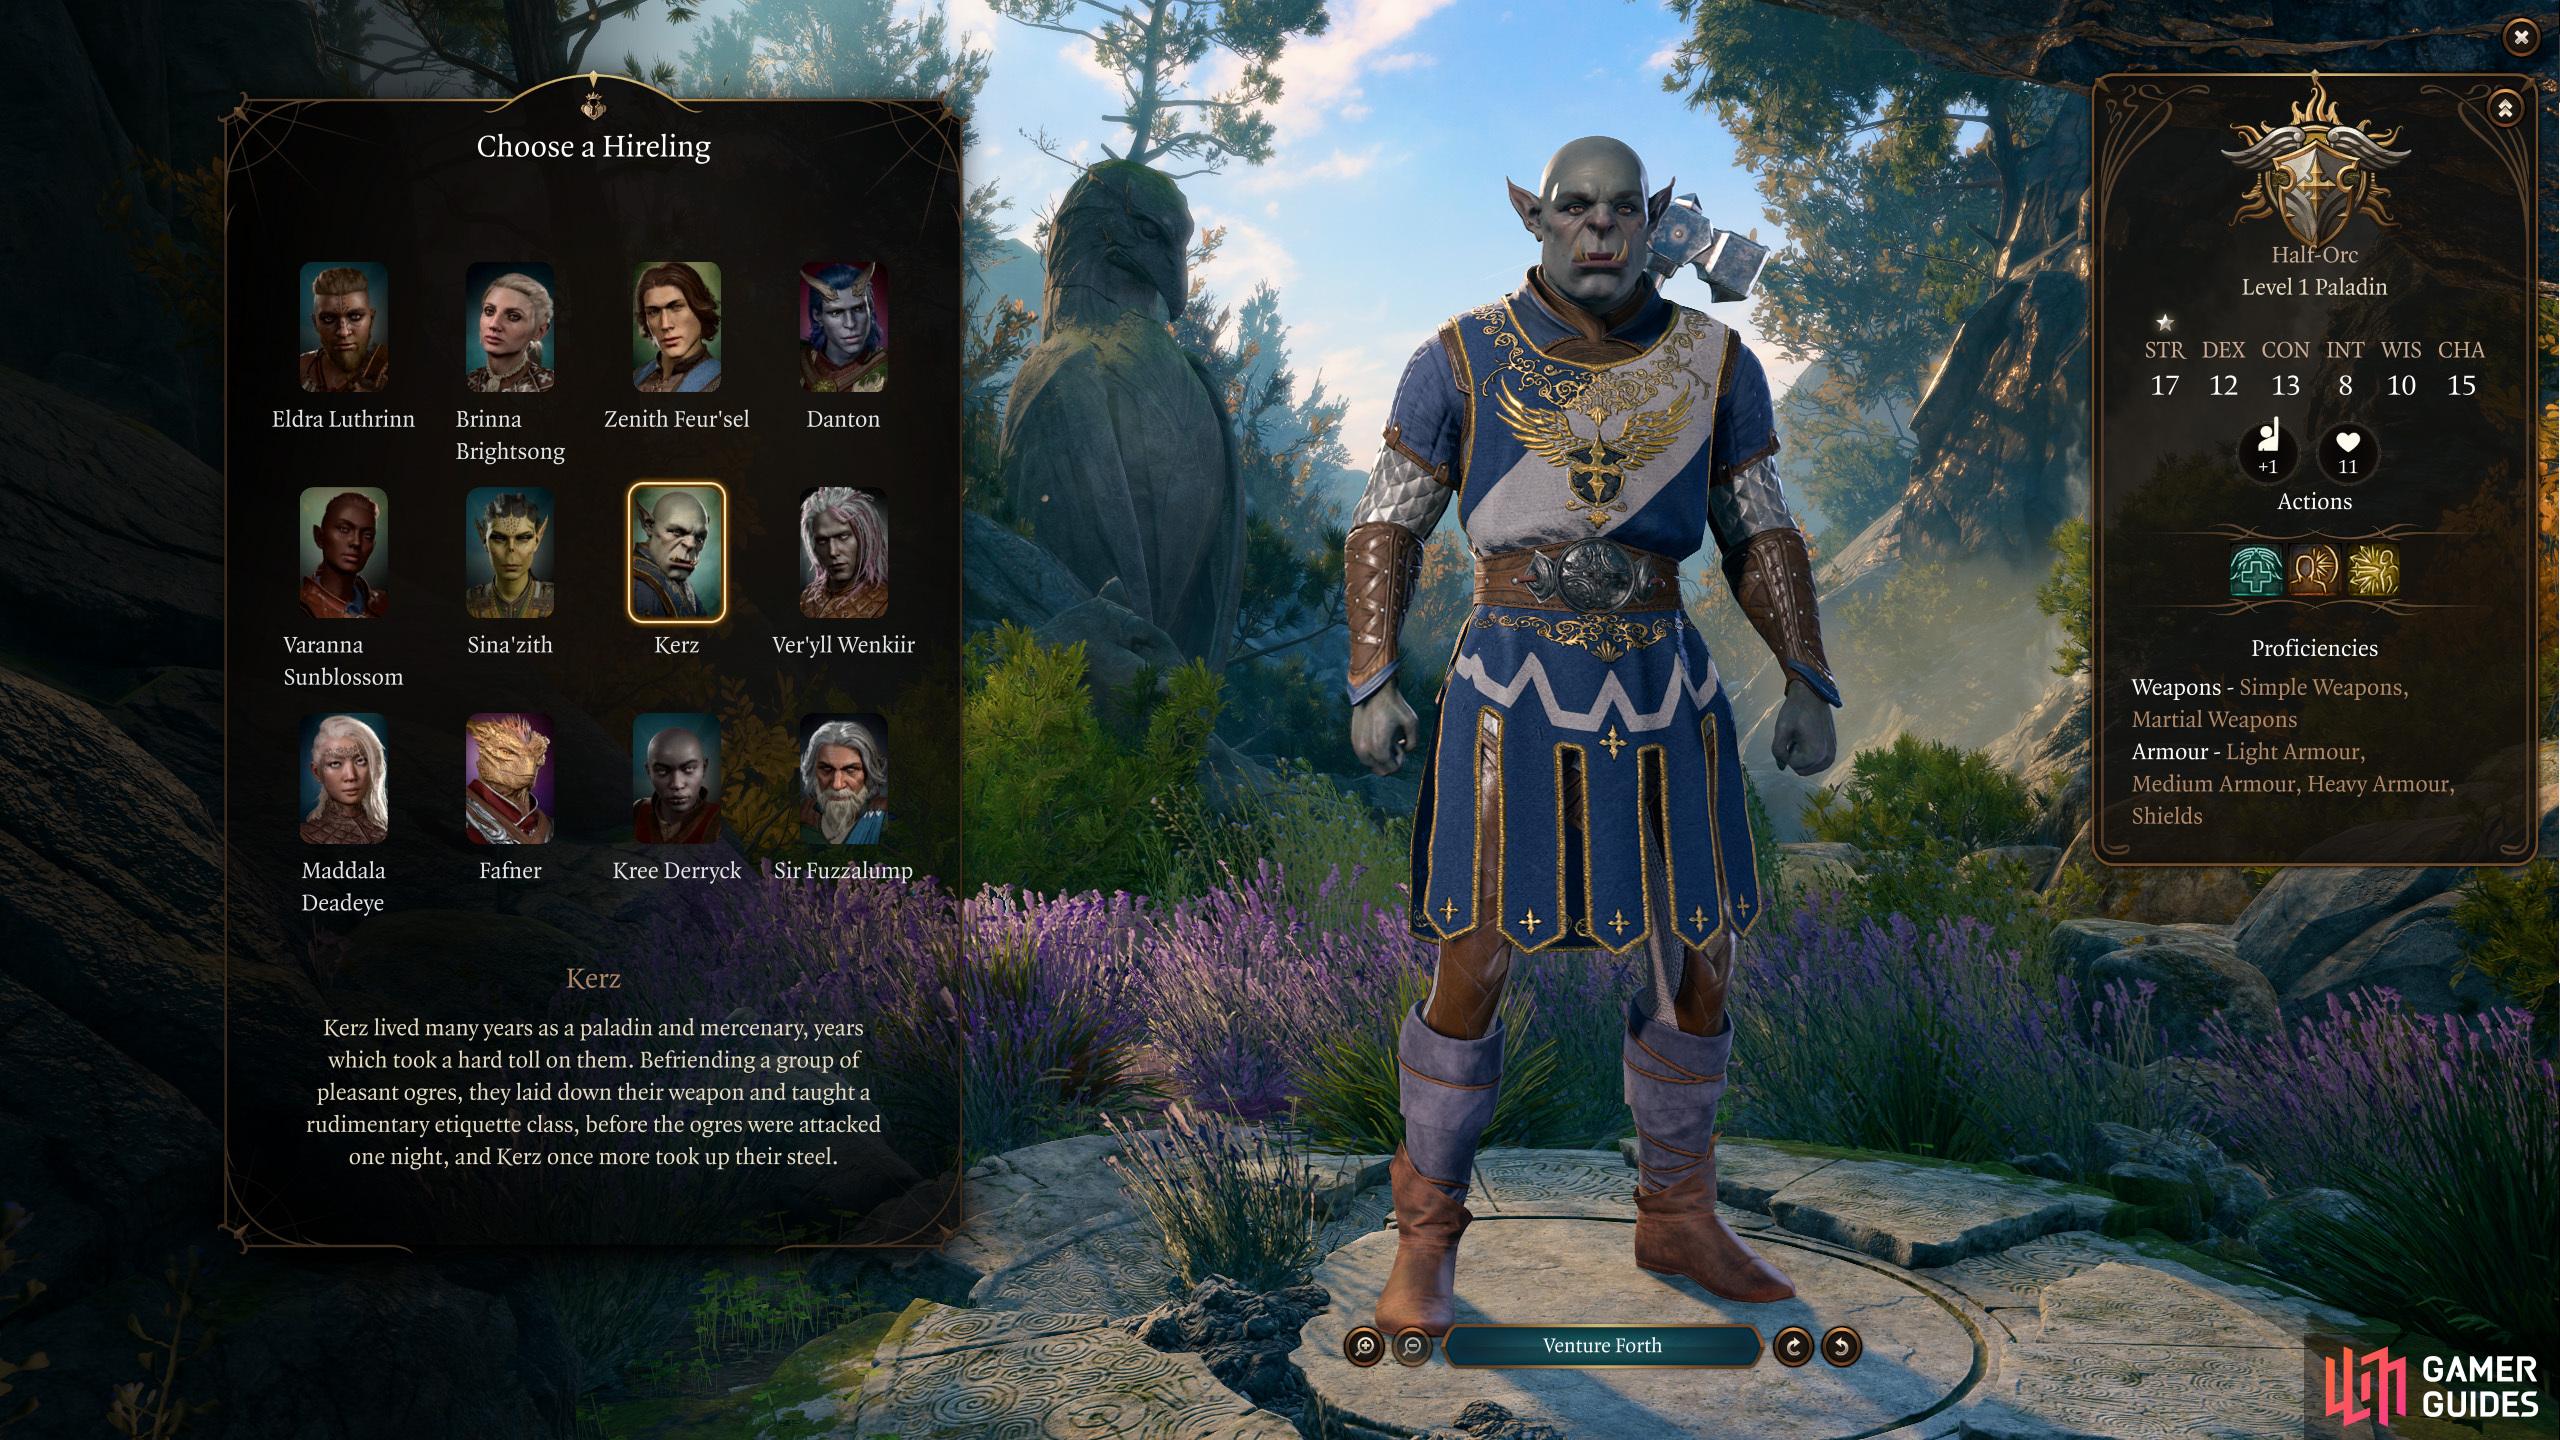 Each Hireling is a character you can bring to your party from the character creation screen. Image via Larian Studios.